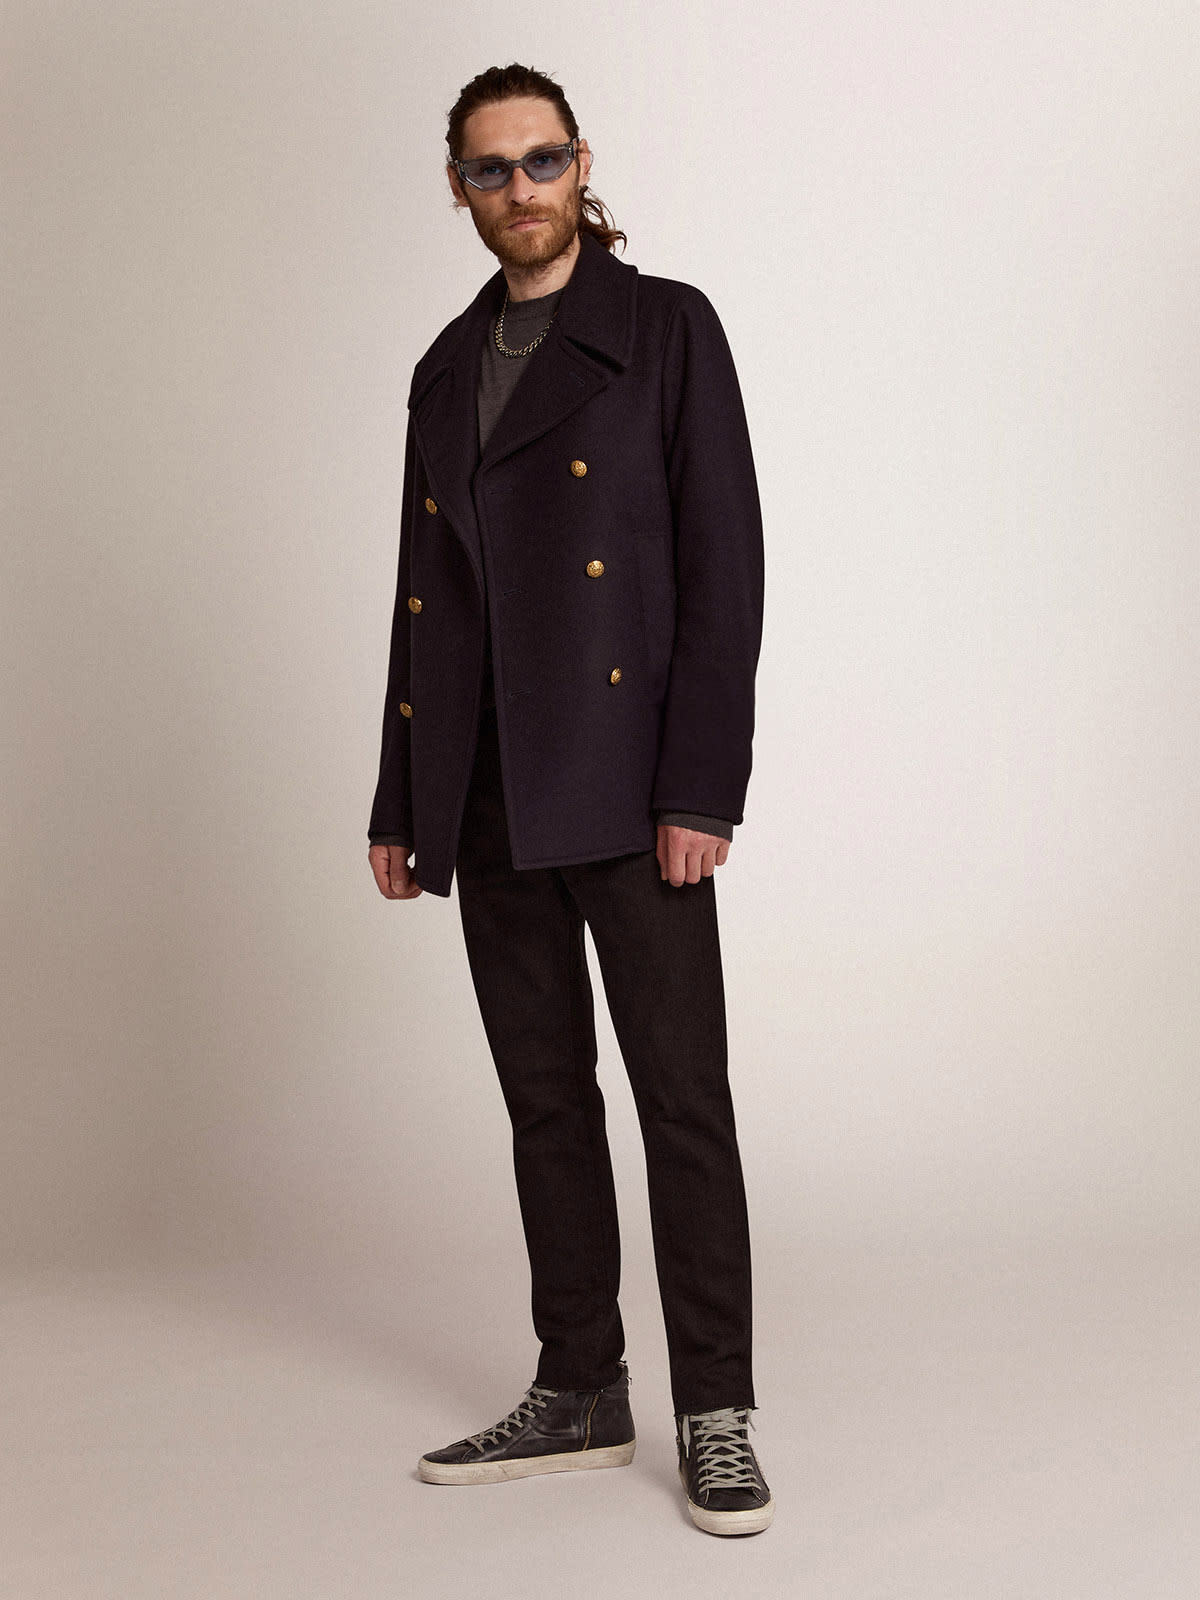 Golden Goose - Men's double-breasted coat in dark blue wool with gold buttons in 